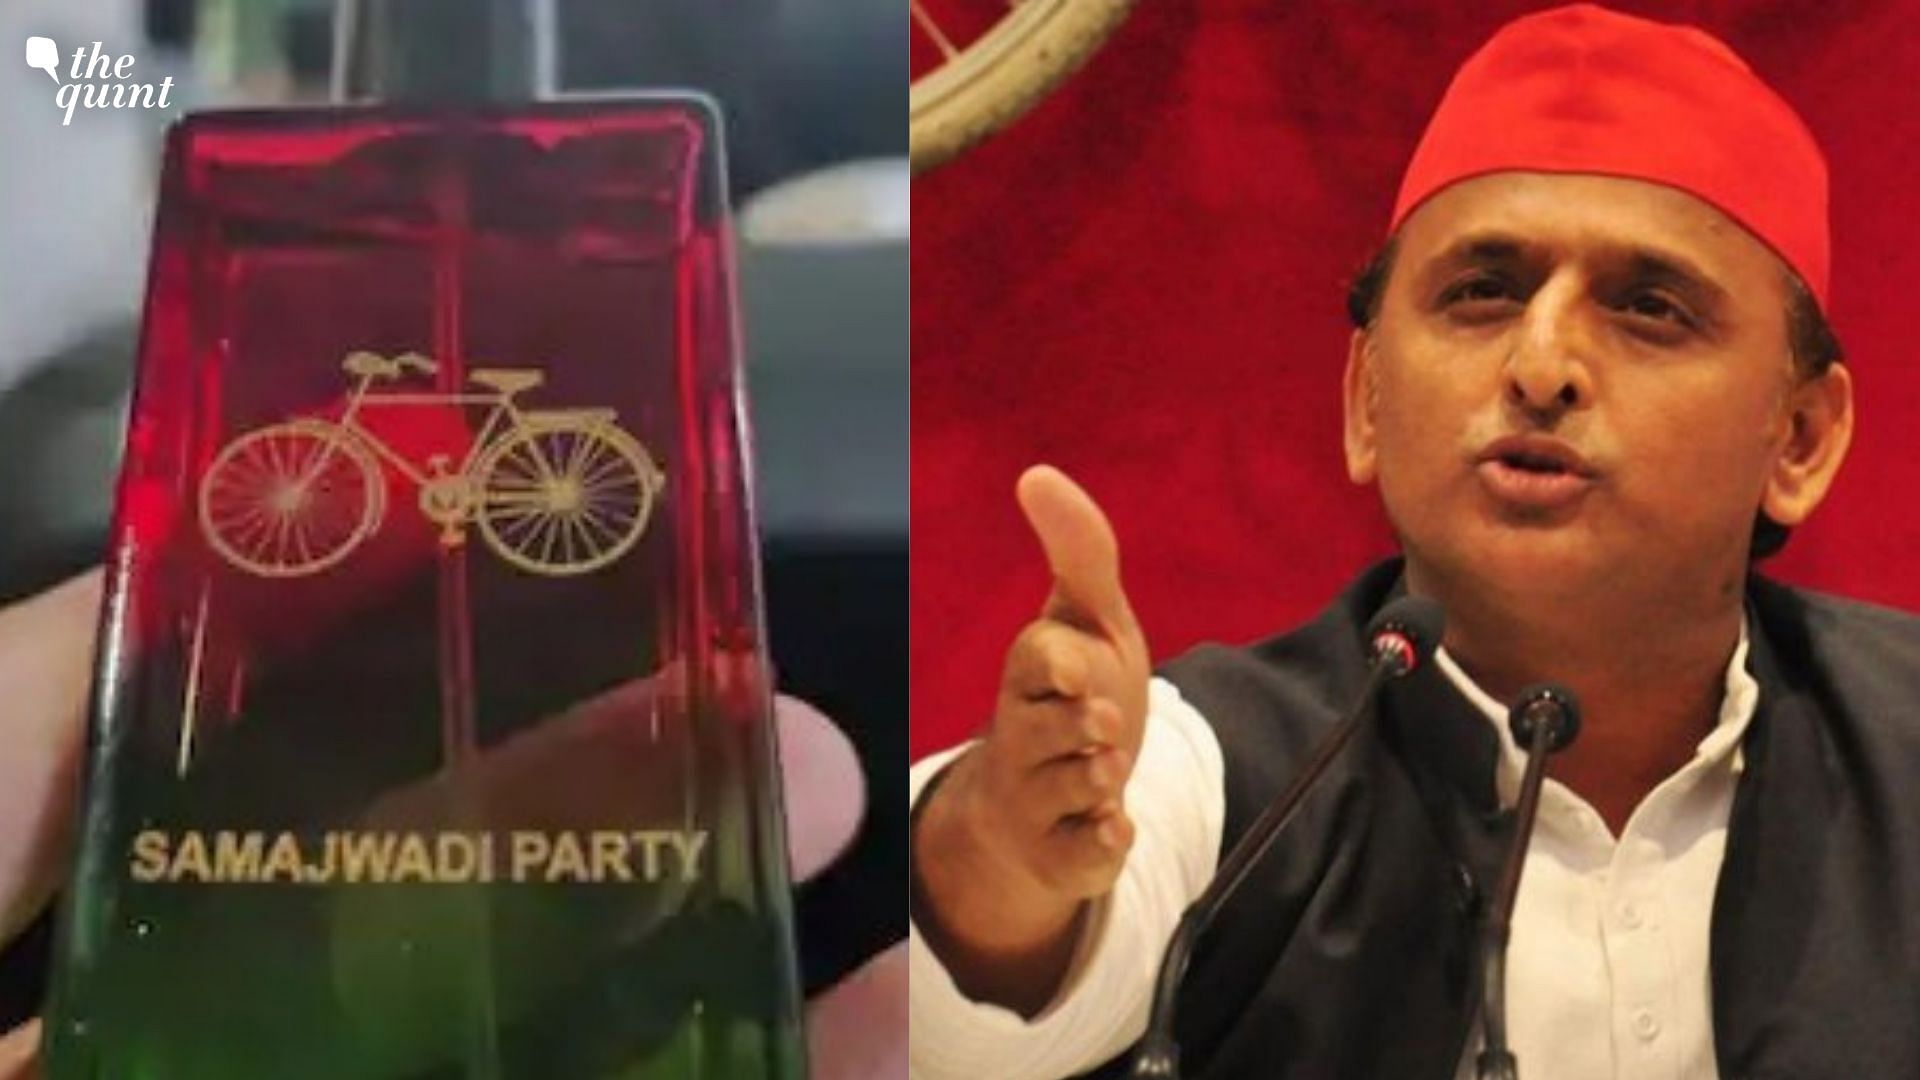 <div class="paragraphs"><p>Samajwadi Party President Akhilesh Yadav launched the party perfume in Lucknow.</p></div>